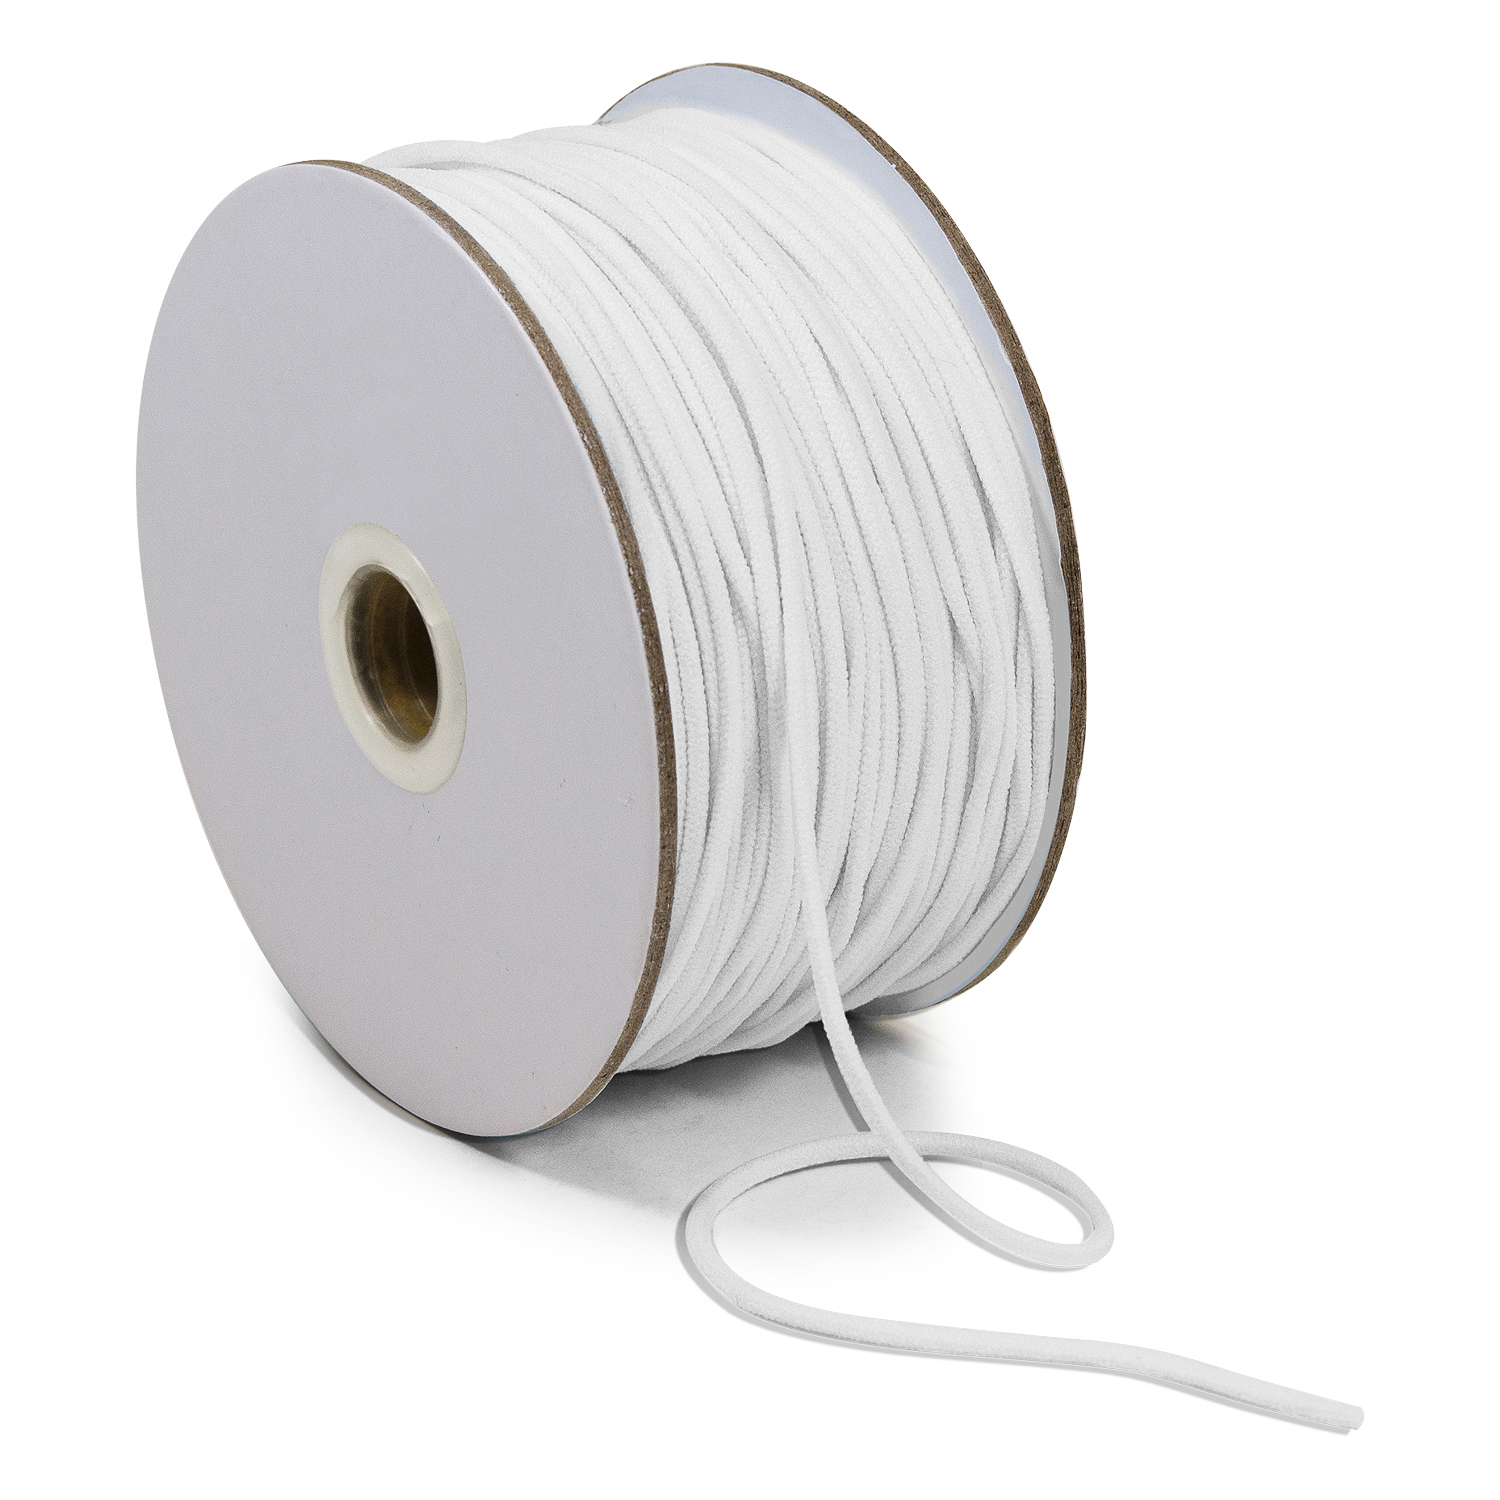 Coopay 160 Yards Length 1/8 Width Elastic Cord Elastic Bands Elastic Rope Heavy Stretch Elastic Spool Knit for Sewing, 2 Rolls, 80 Yards/Roll